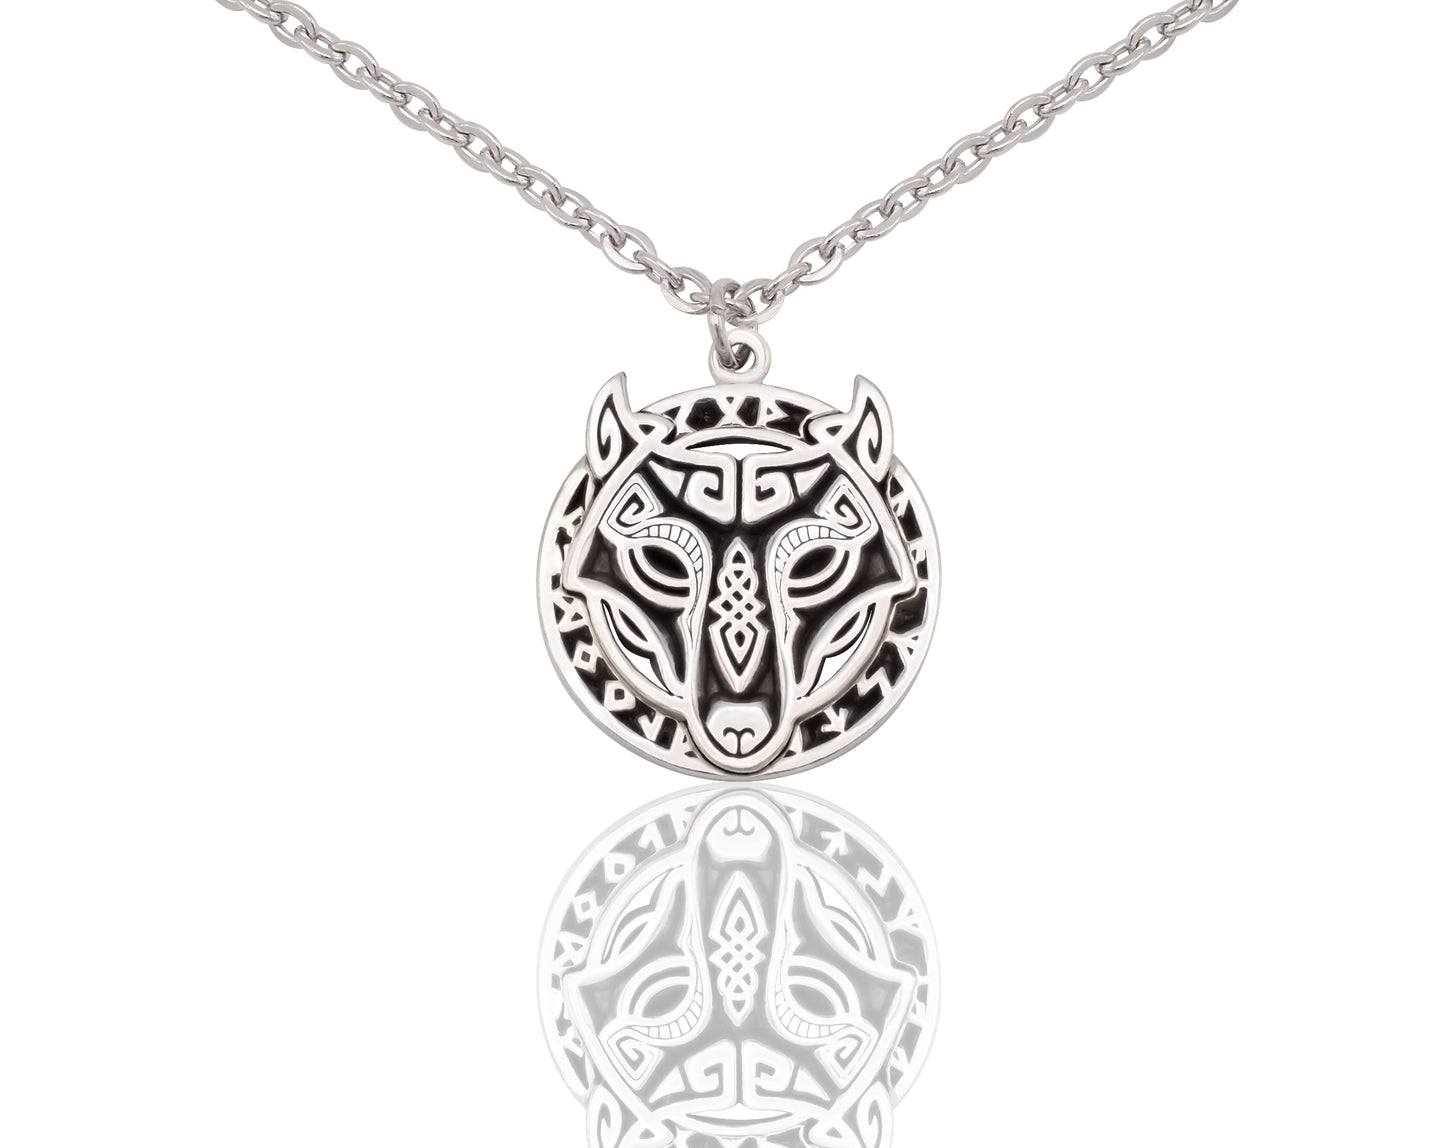 Quinnlyn & Co. Wolf of Odin Pendant Necklace, Handmade Gifts for Women with Inspirational Quote on Greeting Card